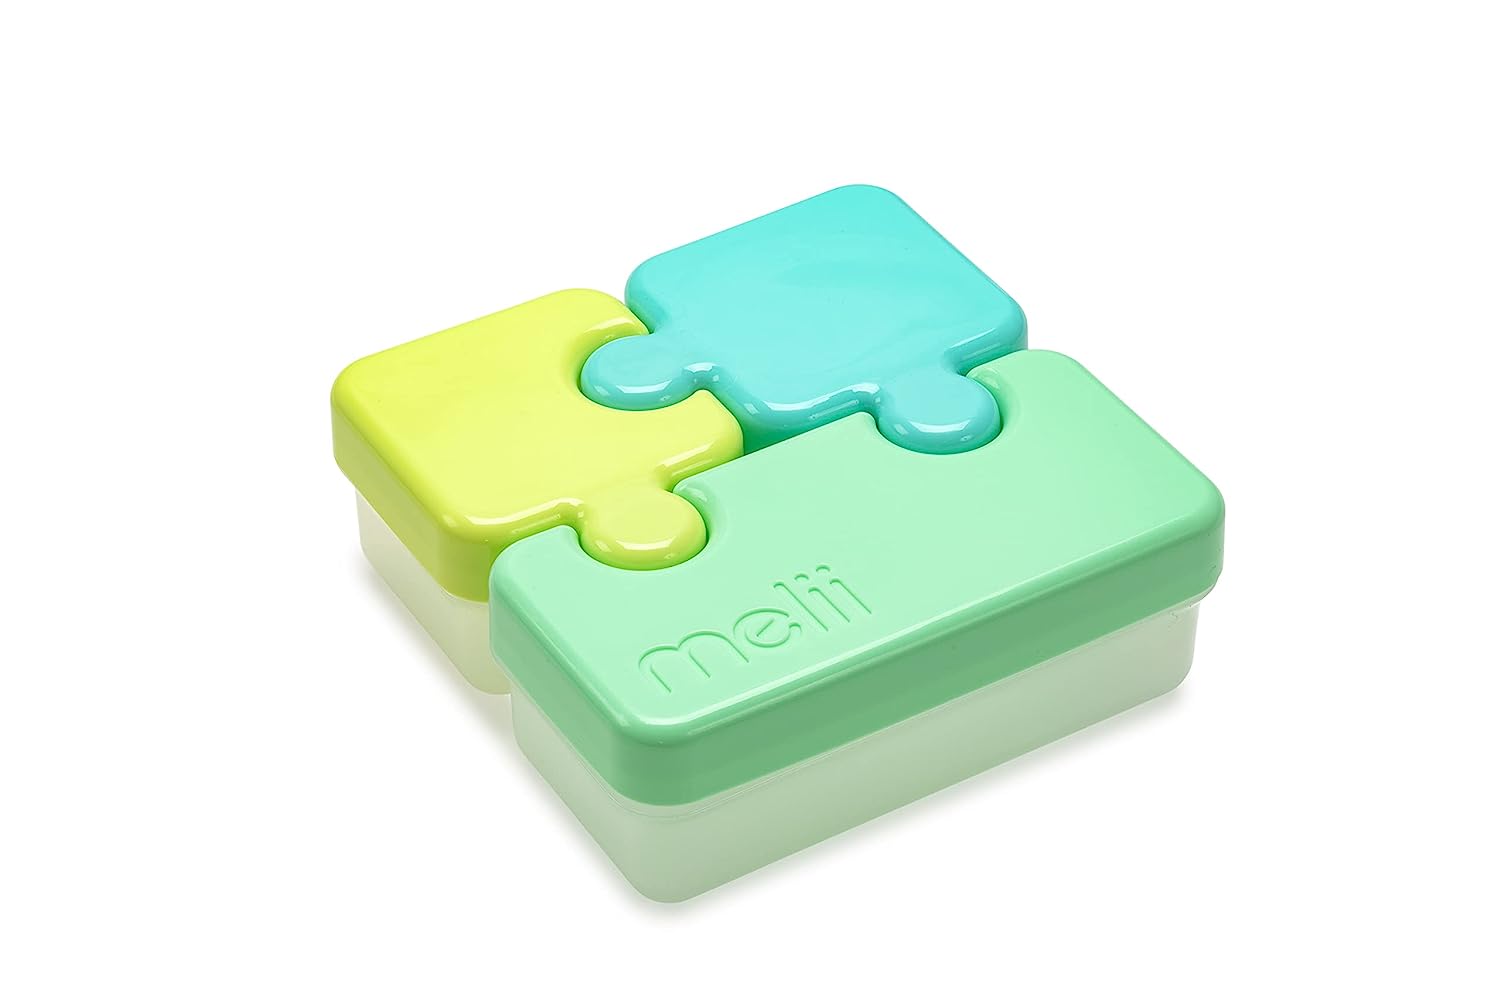 Melii Puzzle Container - Lime, Blue Green.